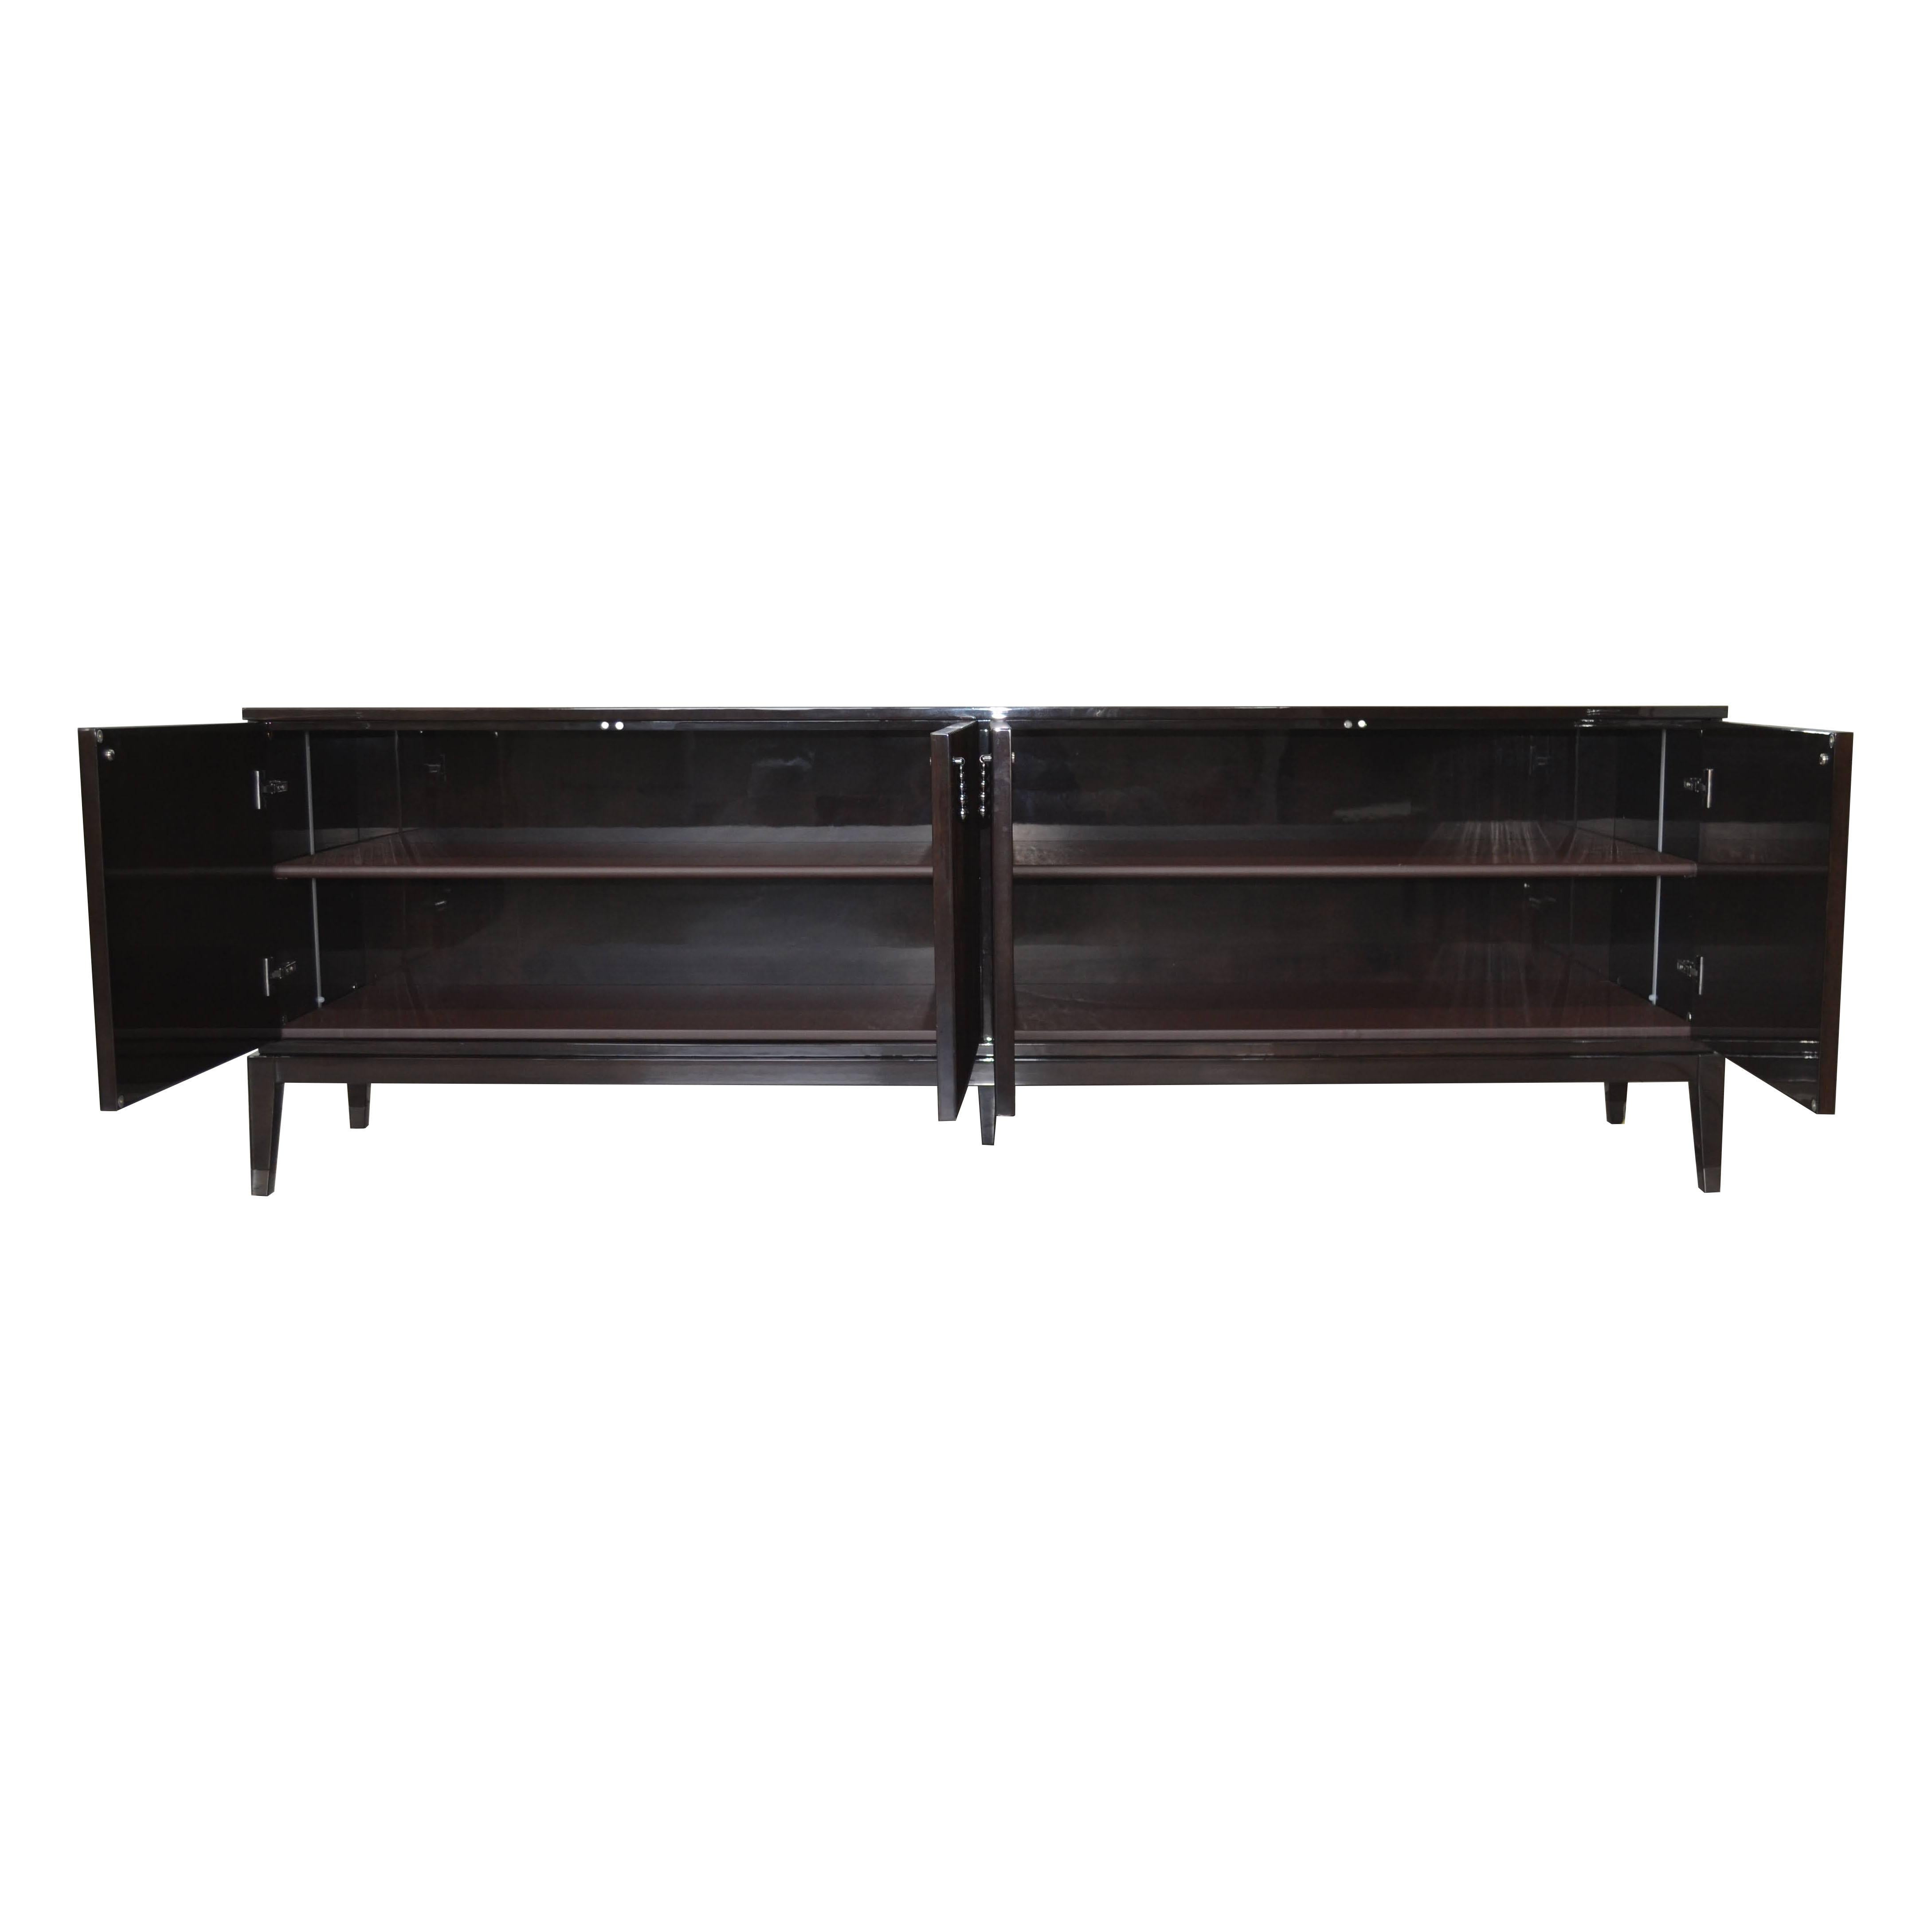 Other Italian Sideboard in Ebony Brown Color with Four Doors For Sale